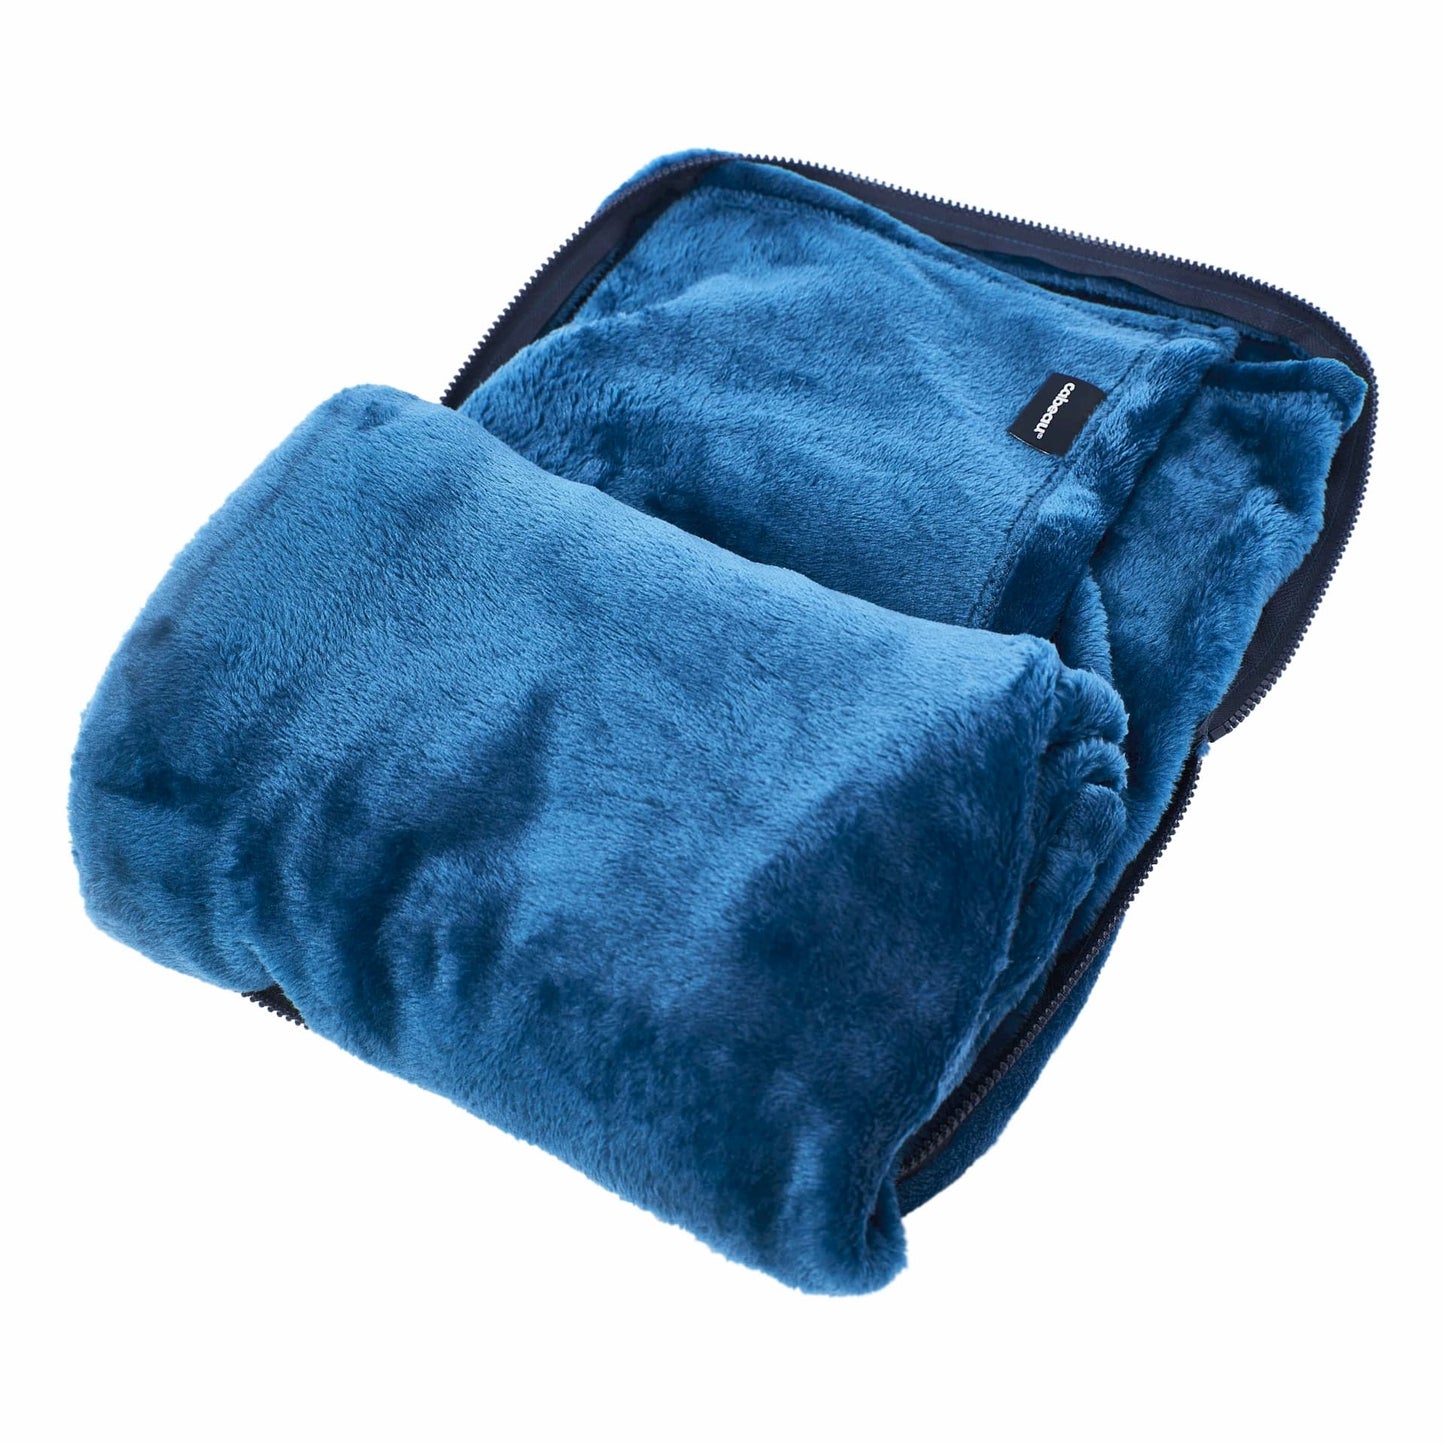 Blue fold and go travel blanket 